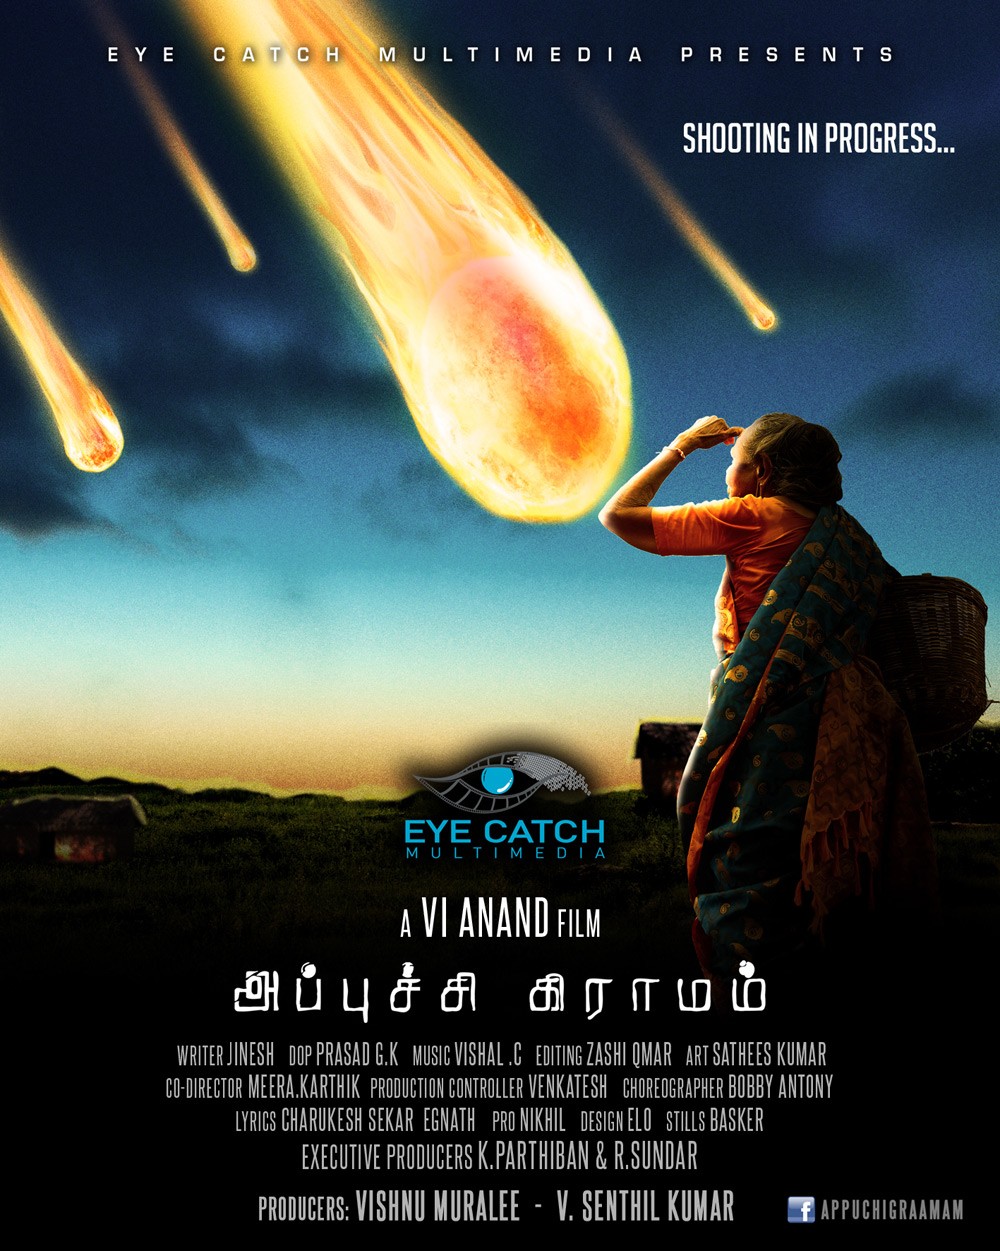 Extra Large Movie Poster Image for Appuchi Graamam (#4 of 4)